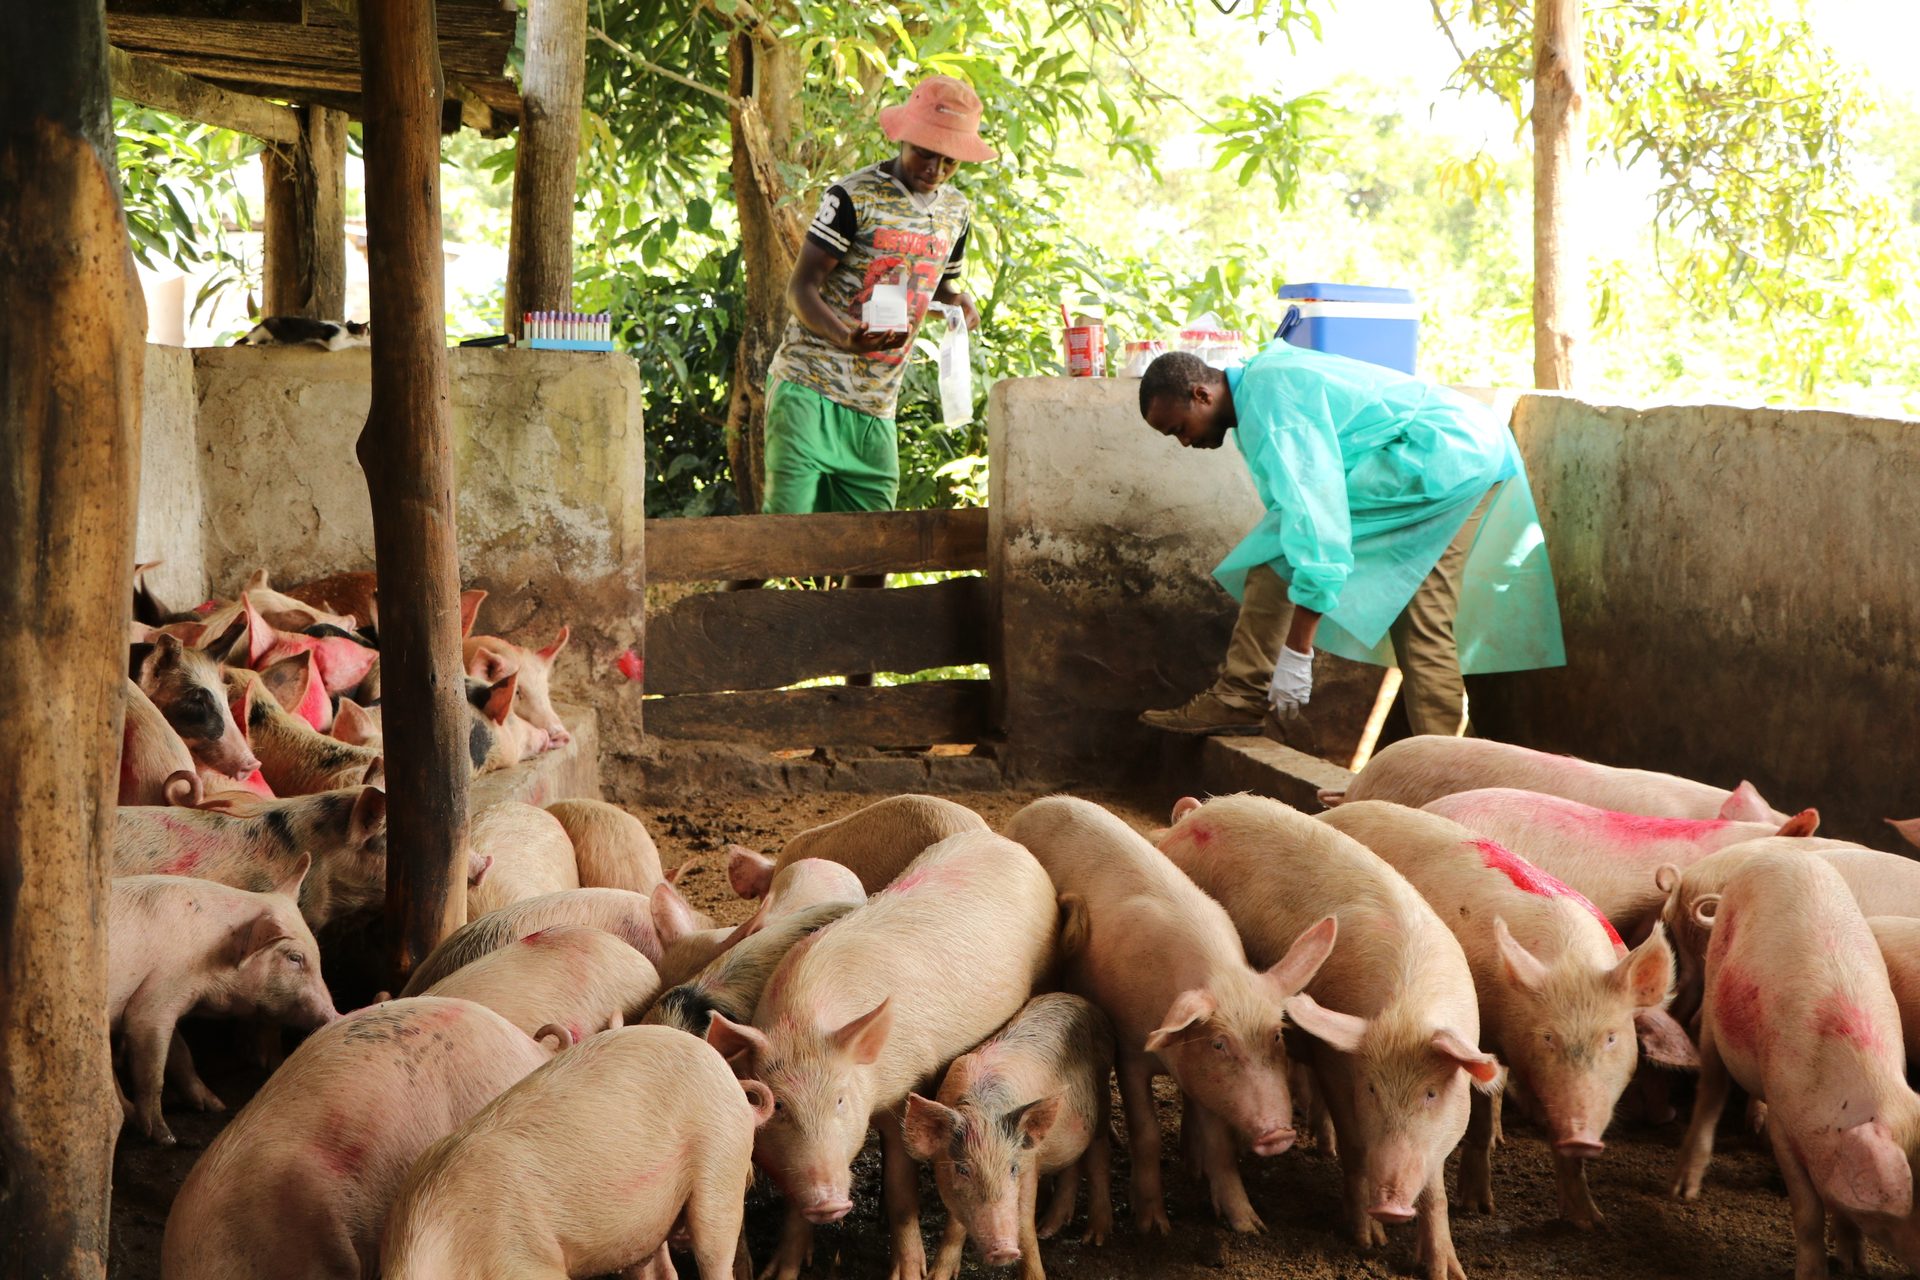 A scientist samples domestic pigs in Guinea to better understand Ebola transmission patterns.